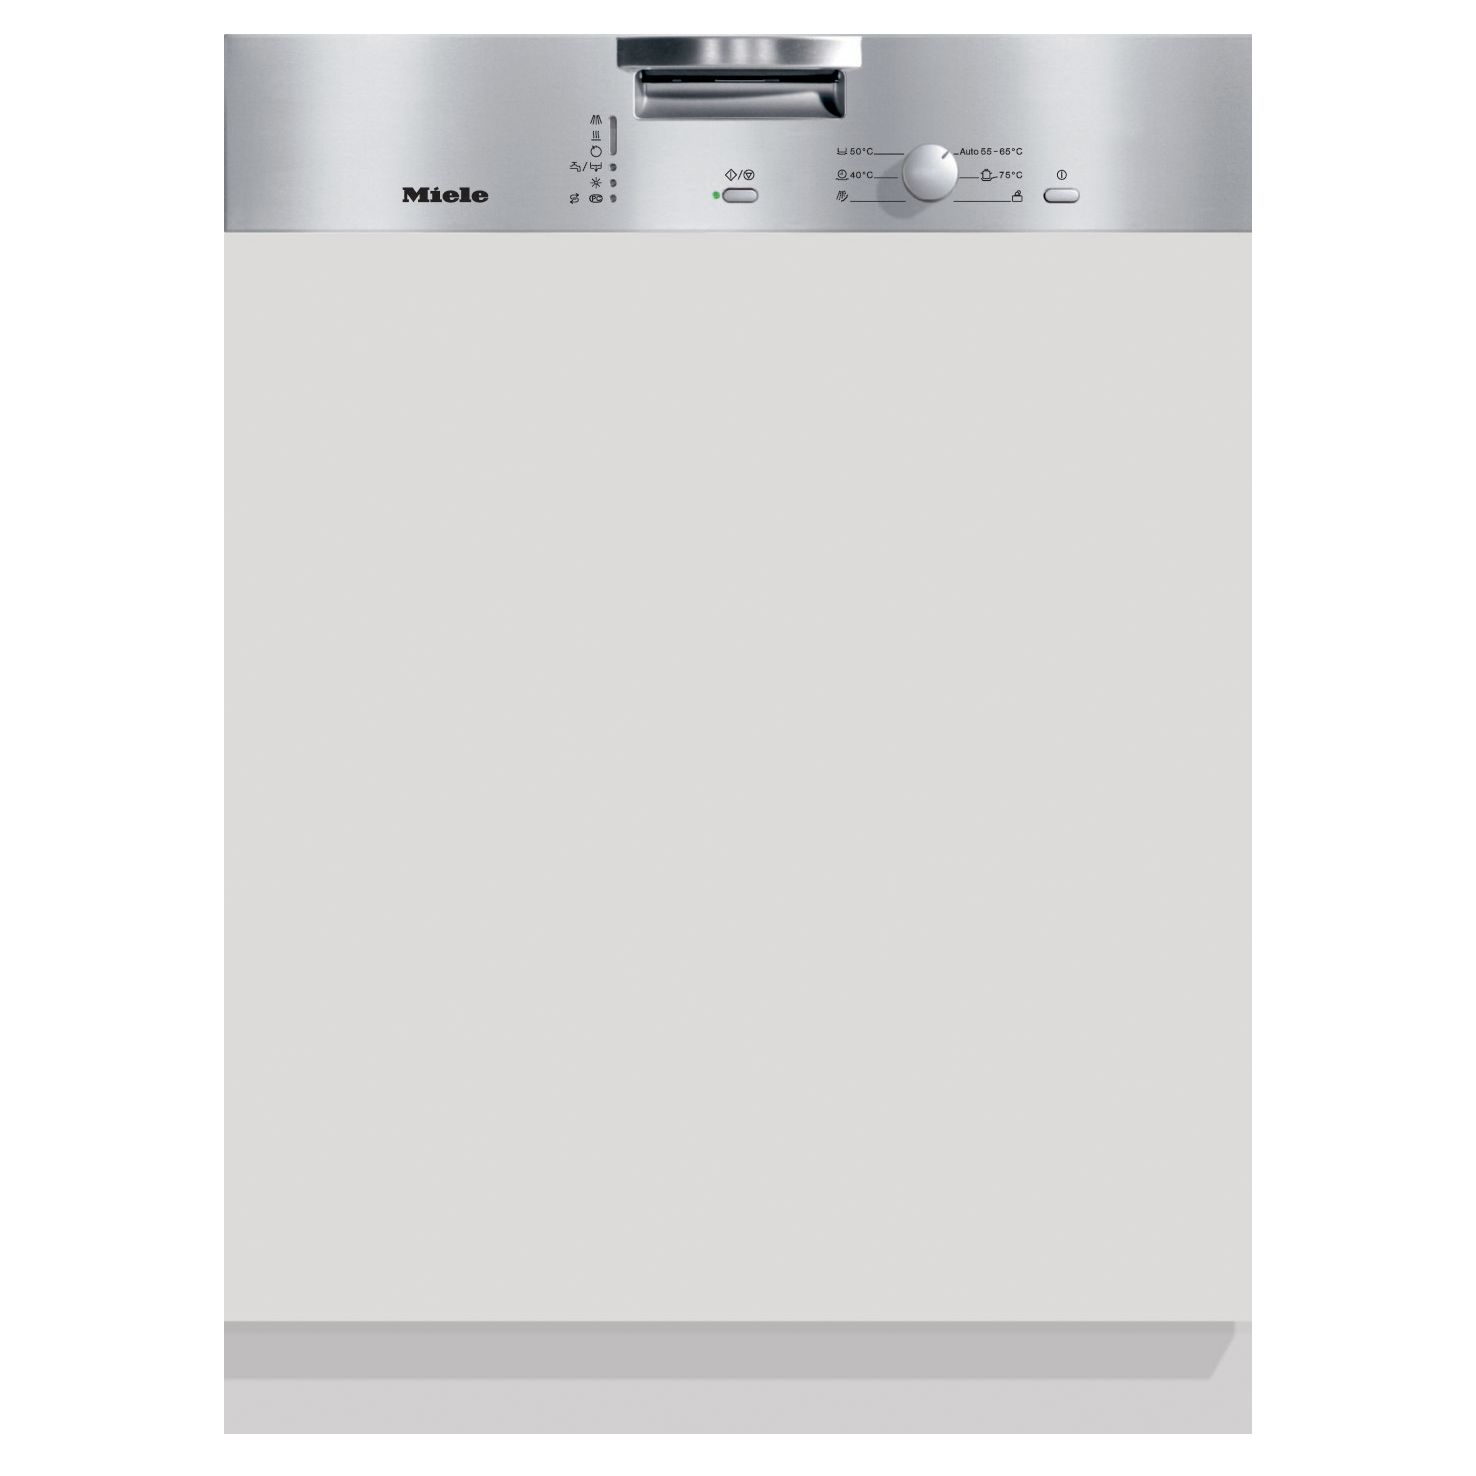 Miele G1022i Semi-Integrated Dishwasher, Stainless Steel at John Lewis